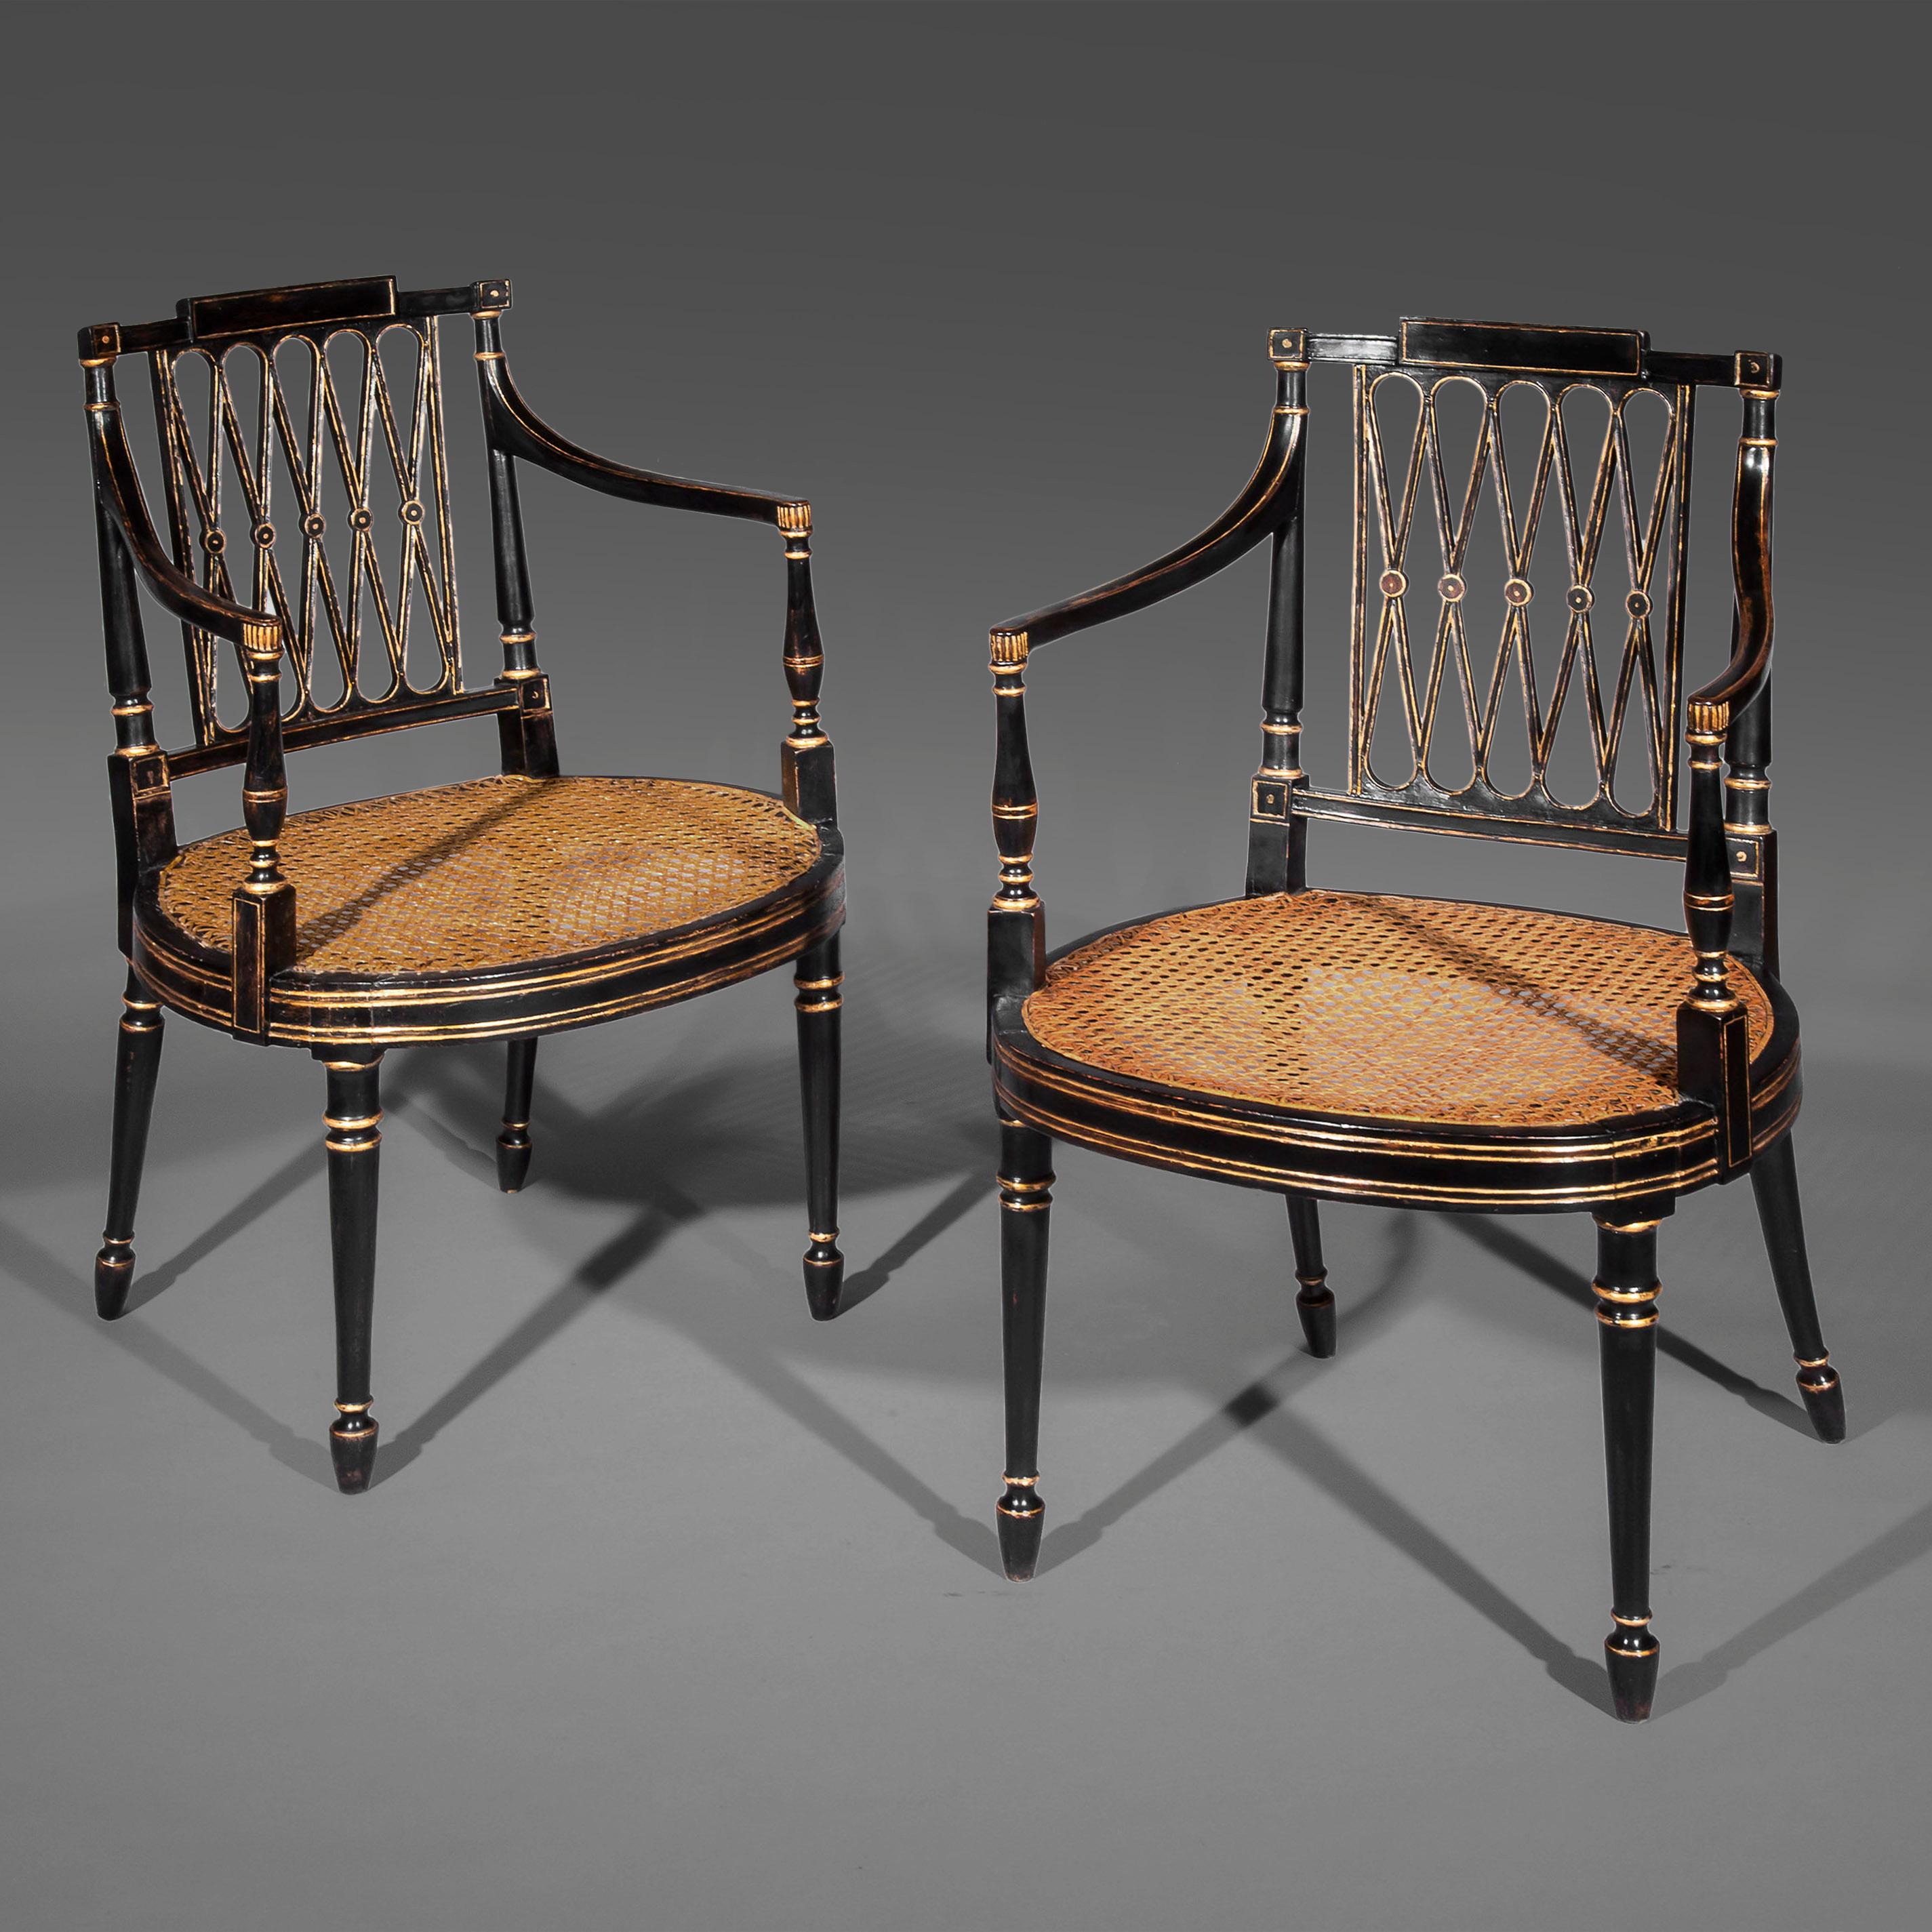 An elegant pair of George III period ebonised and parcel-gilt armchairs of the Garforth pattern, attributable to Gillows of Lancaster and London,
England, circa 1795.

Why we like them
These particularly rare and delicate, wonderfully